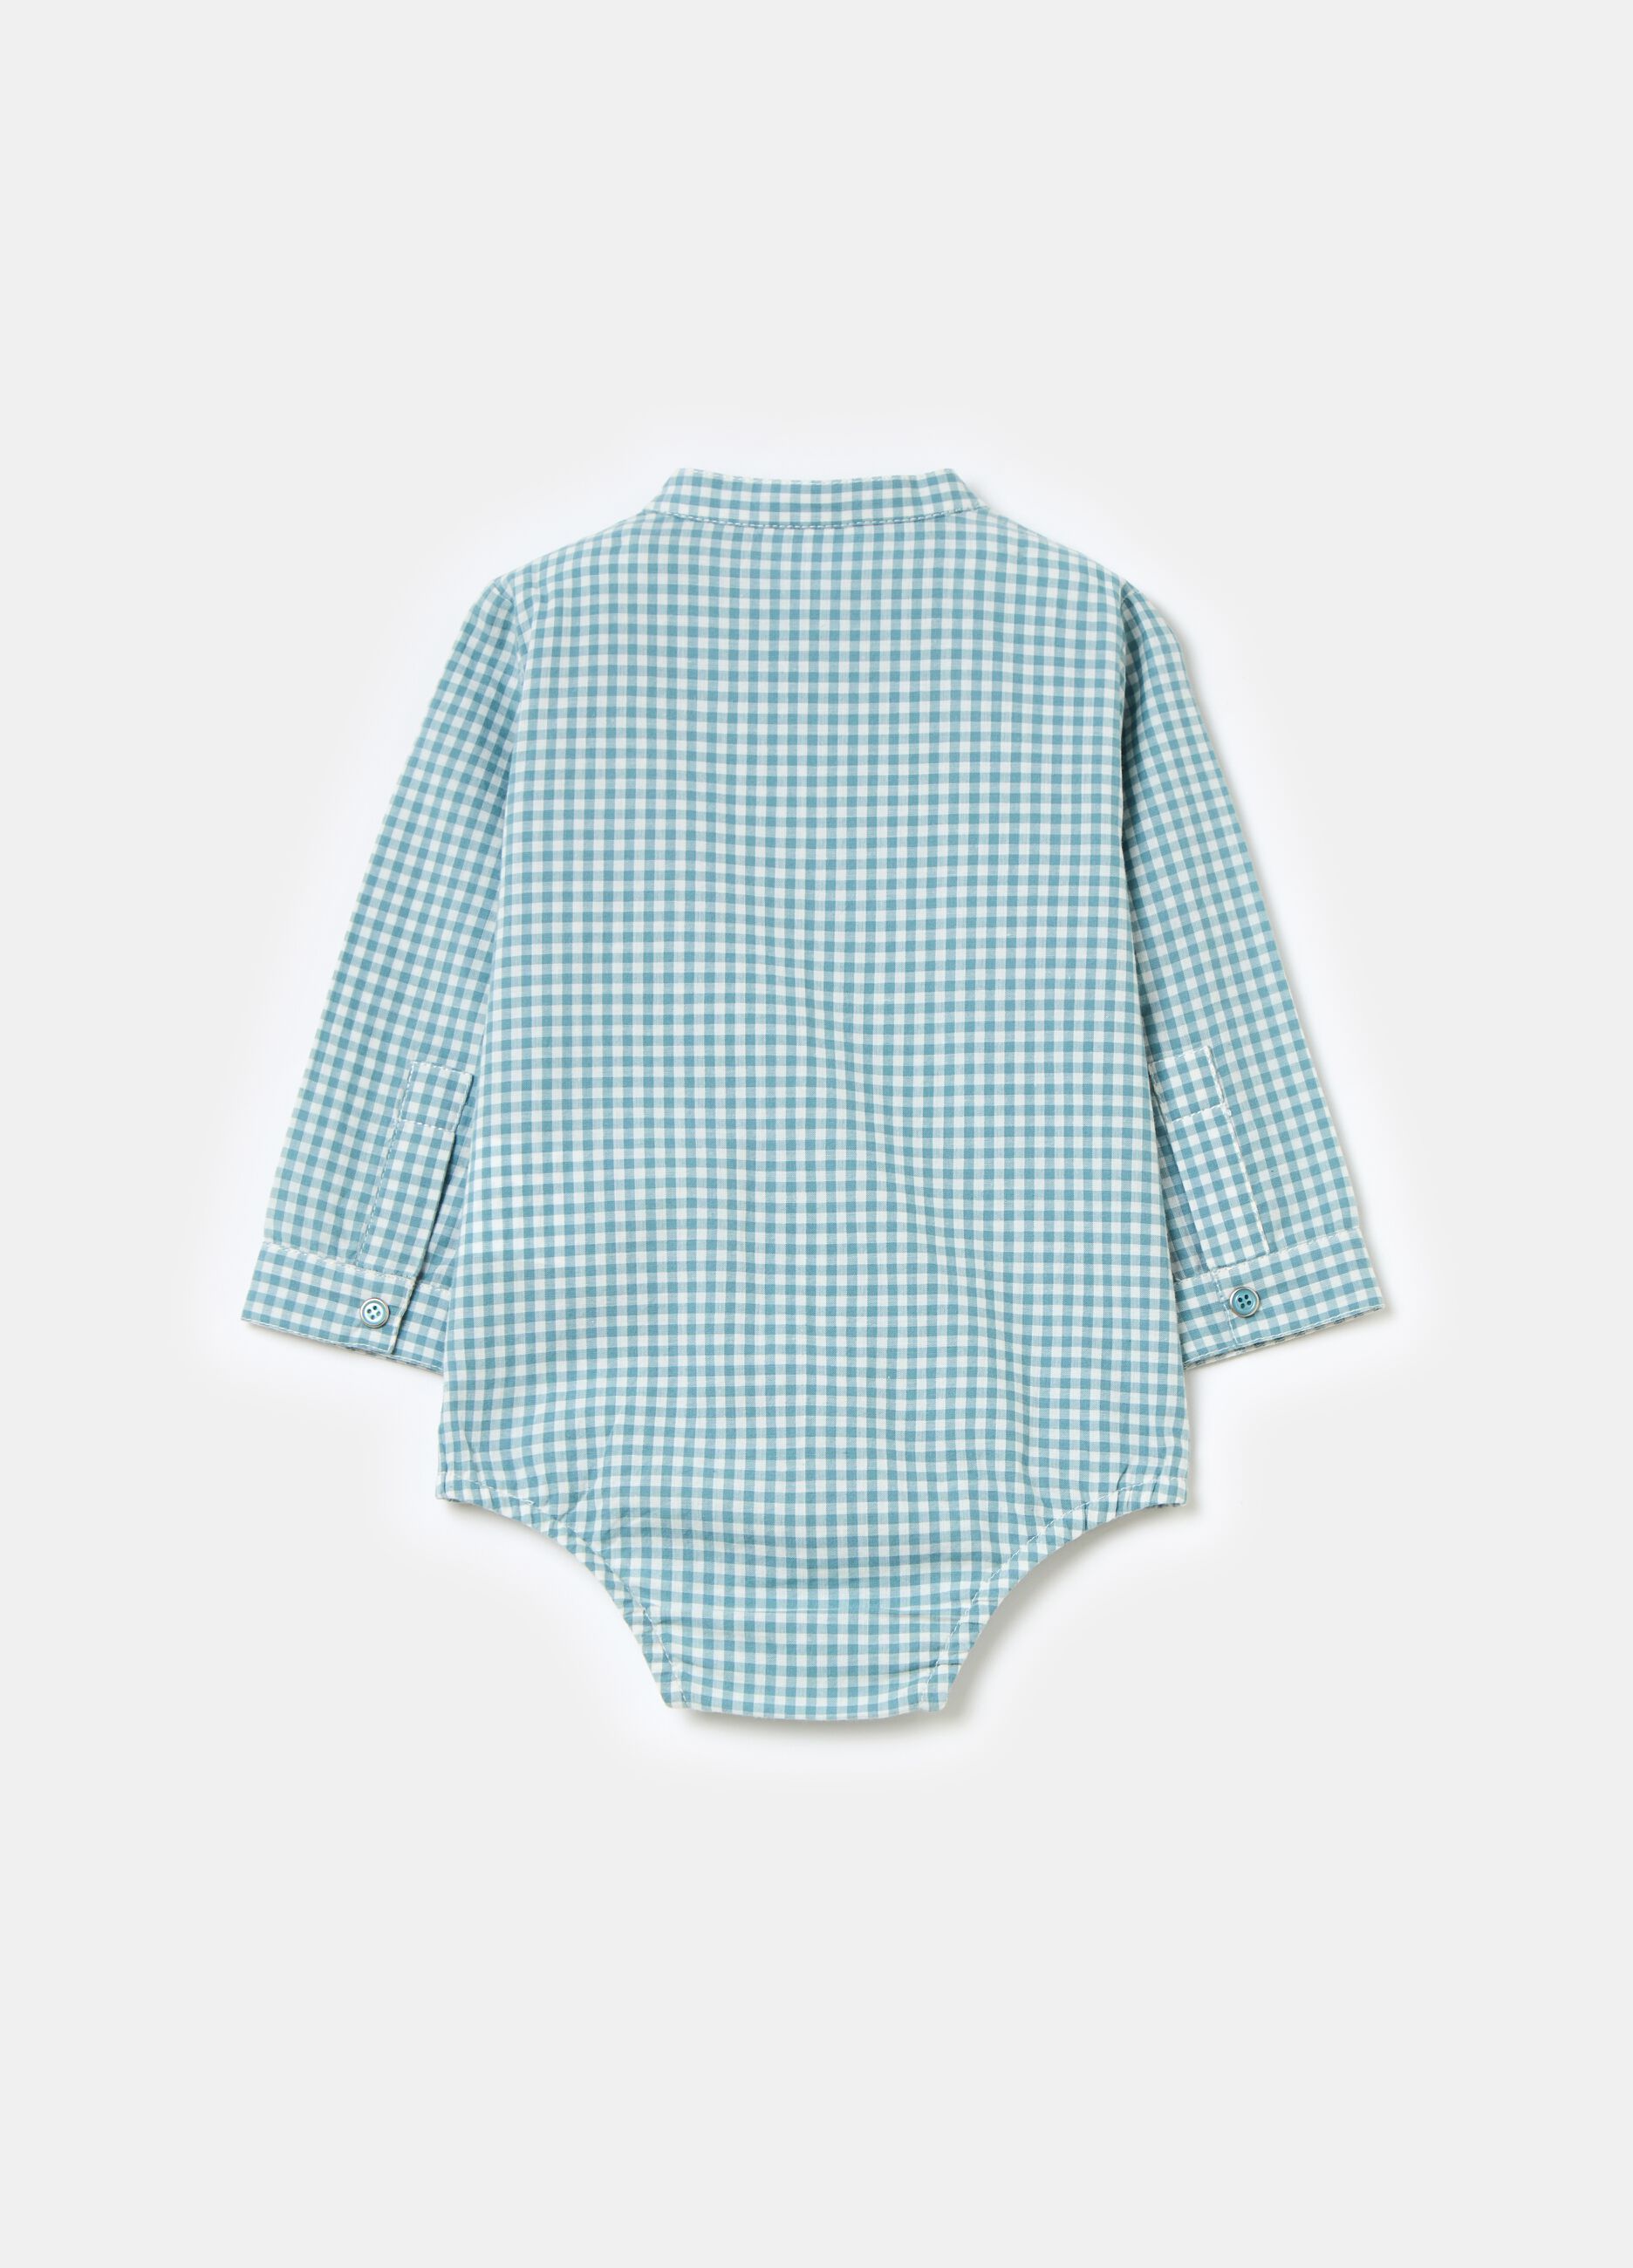 Bodysuit shirt with gingham pattern